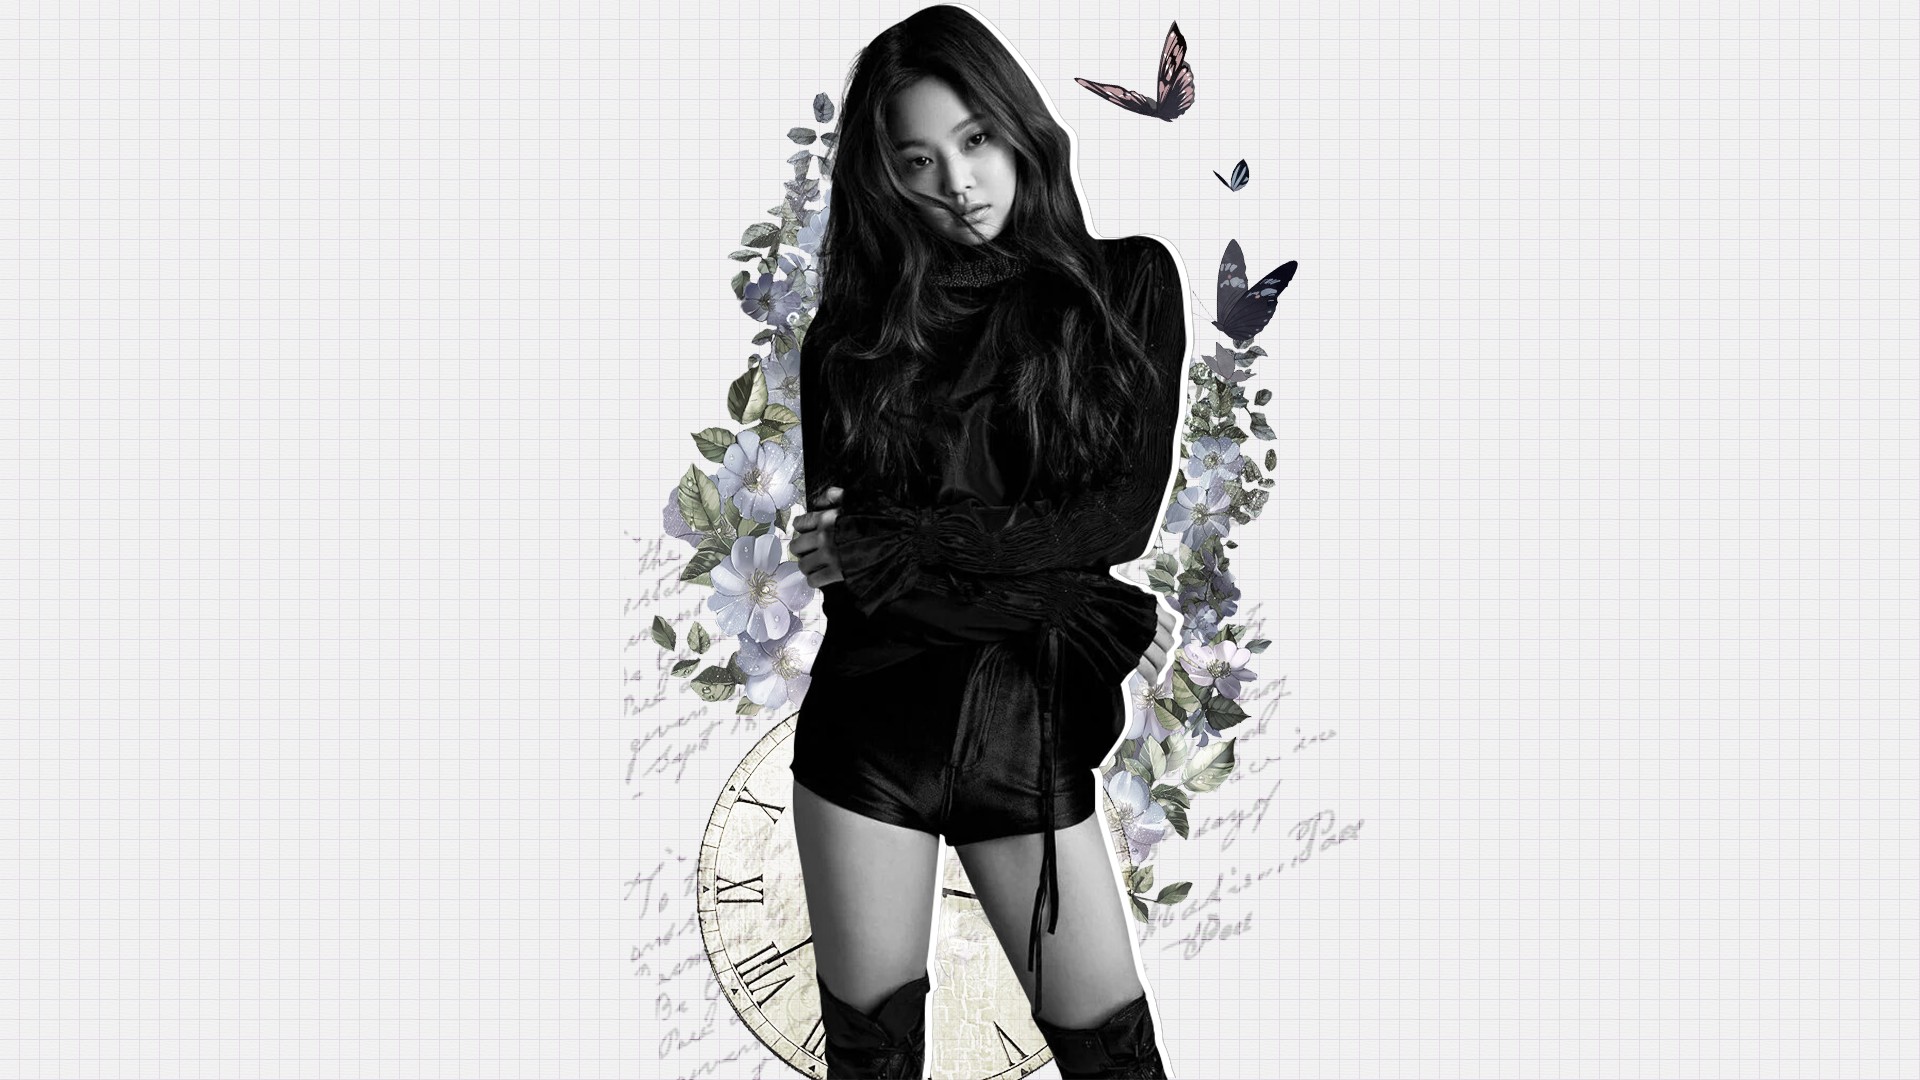 Jennie Blackpink Wallpaper HD with high-resolution 1920x1080 pixel. You can use this wallpaper for your Desktop Computer Backgrounds, Mac Wallpapers, Android Lock screen or iPhone Screensavers and another smartphone device